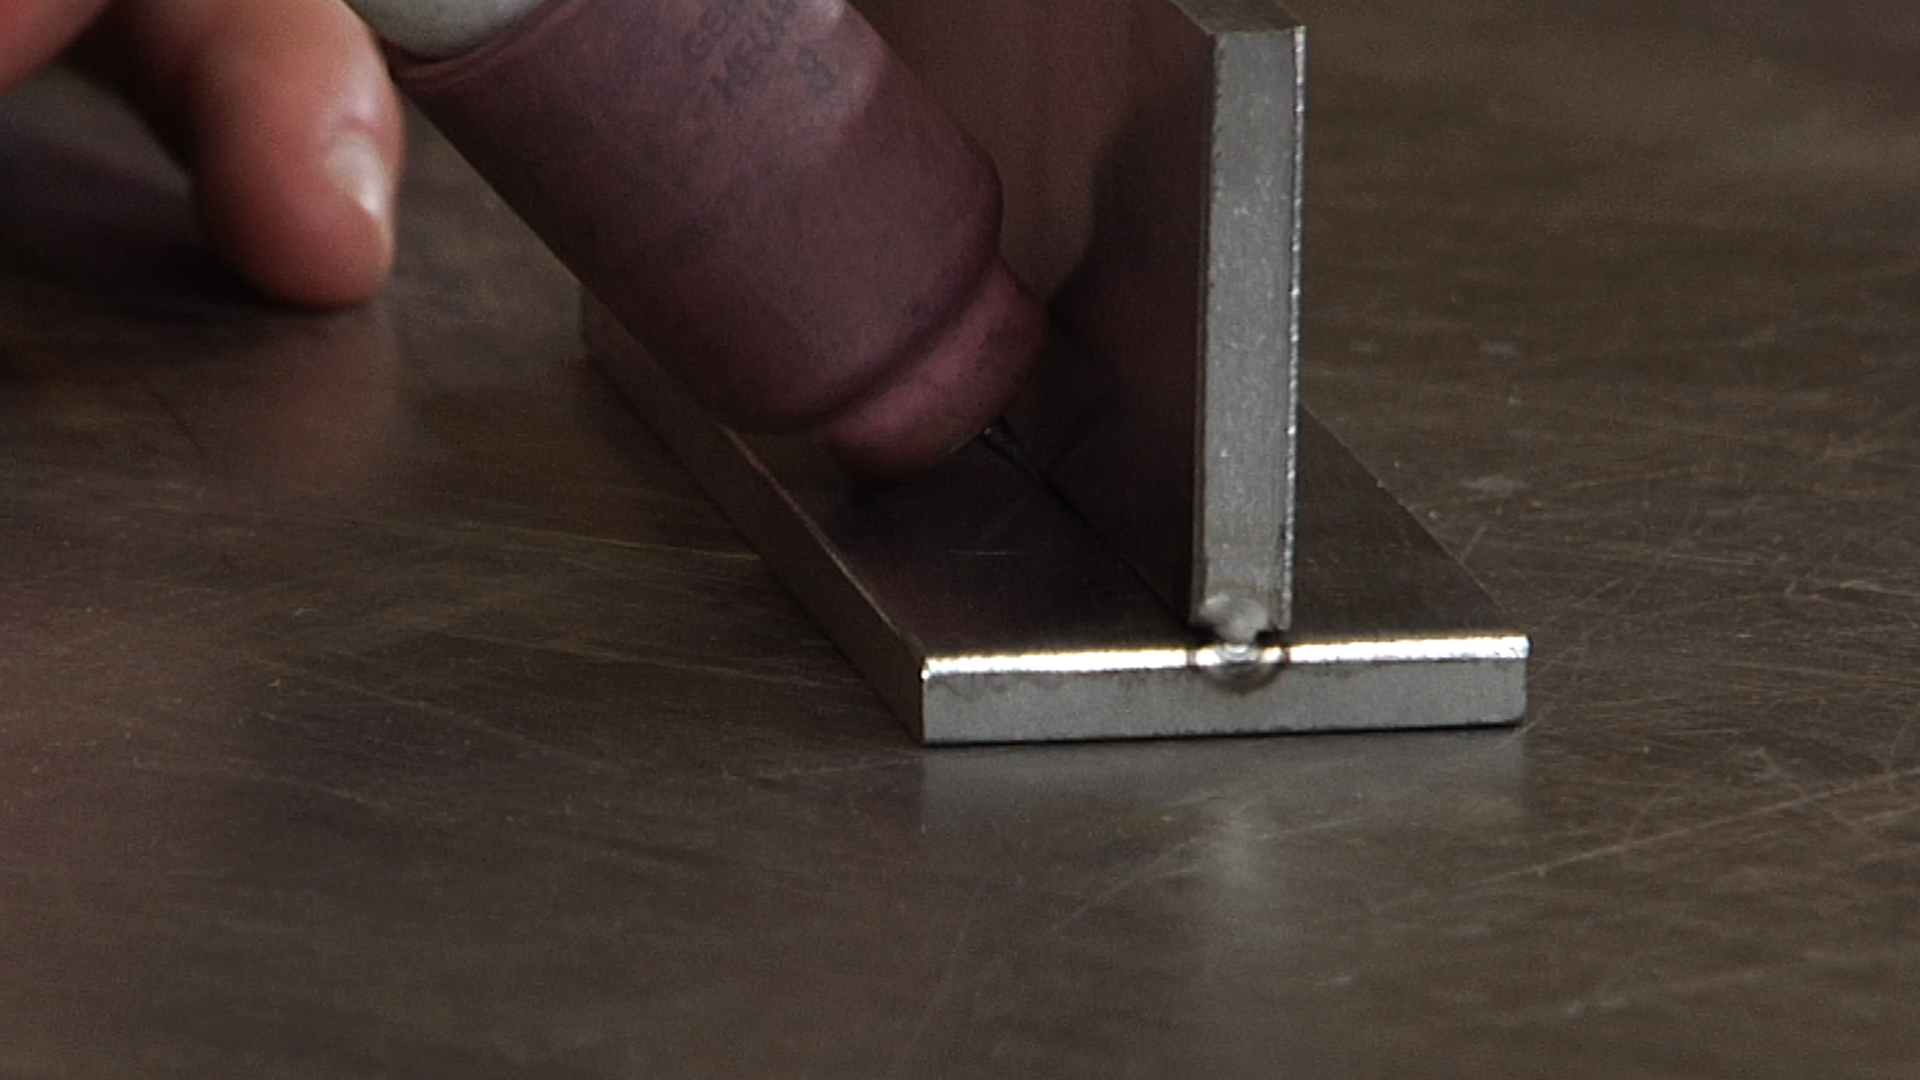 How to TIG Weld: Torch Setup product featured image thumbnail.